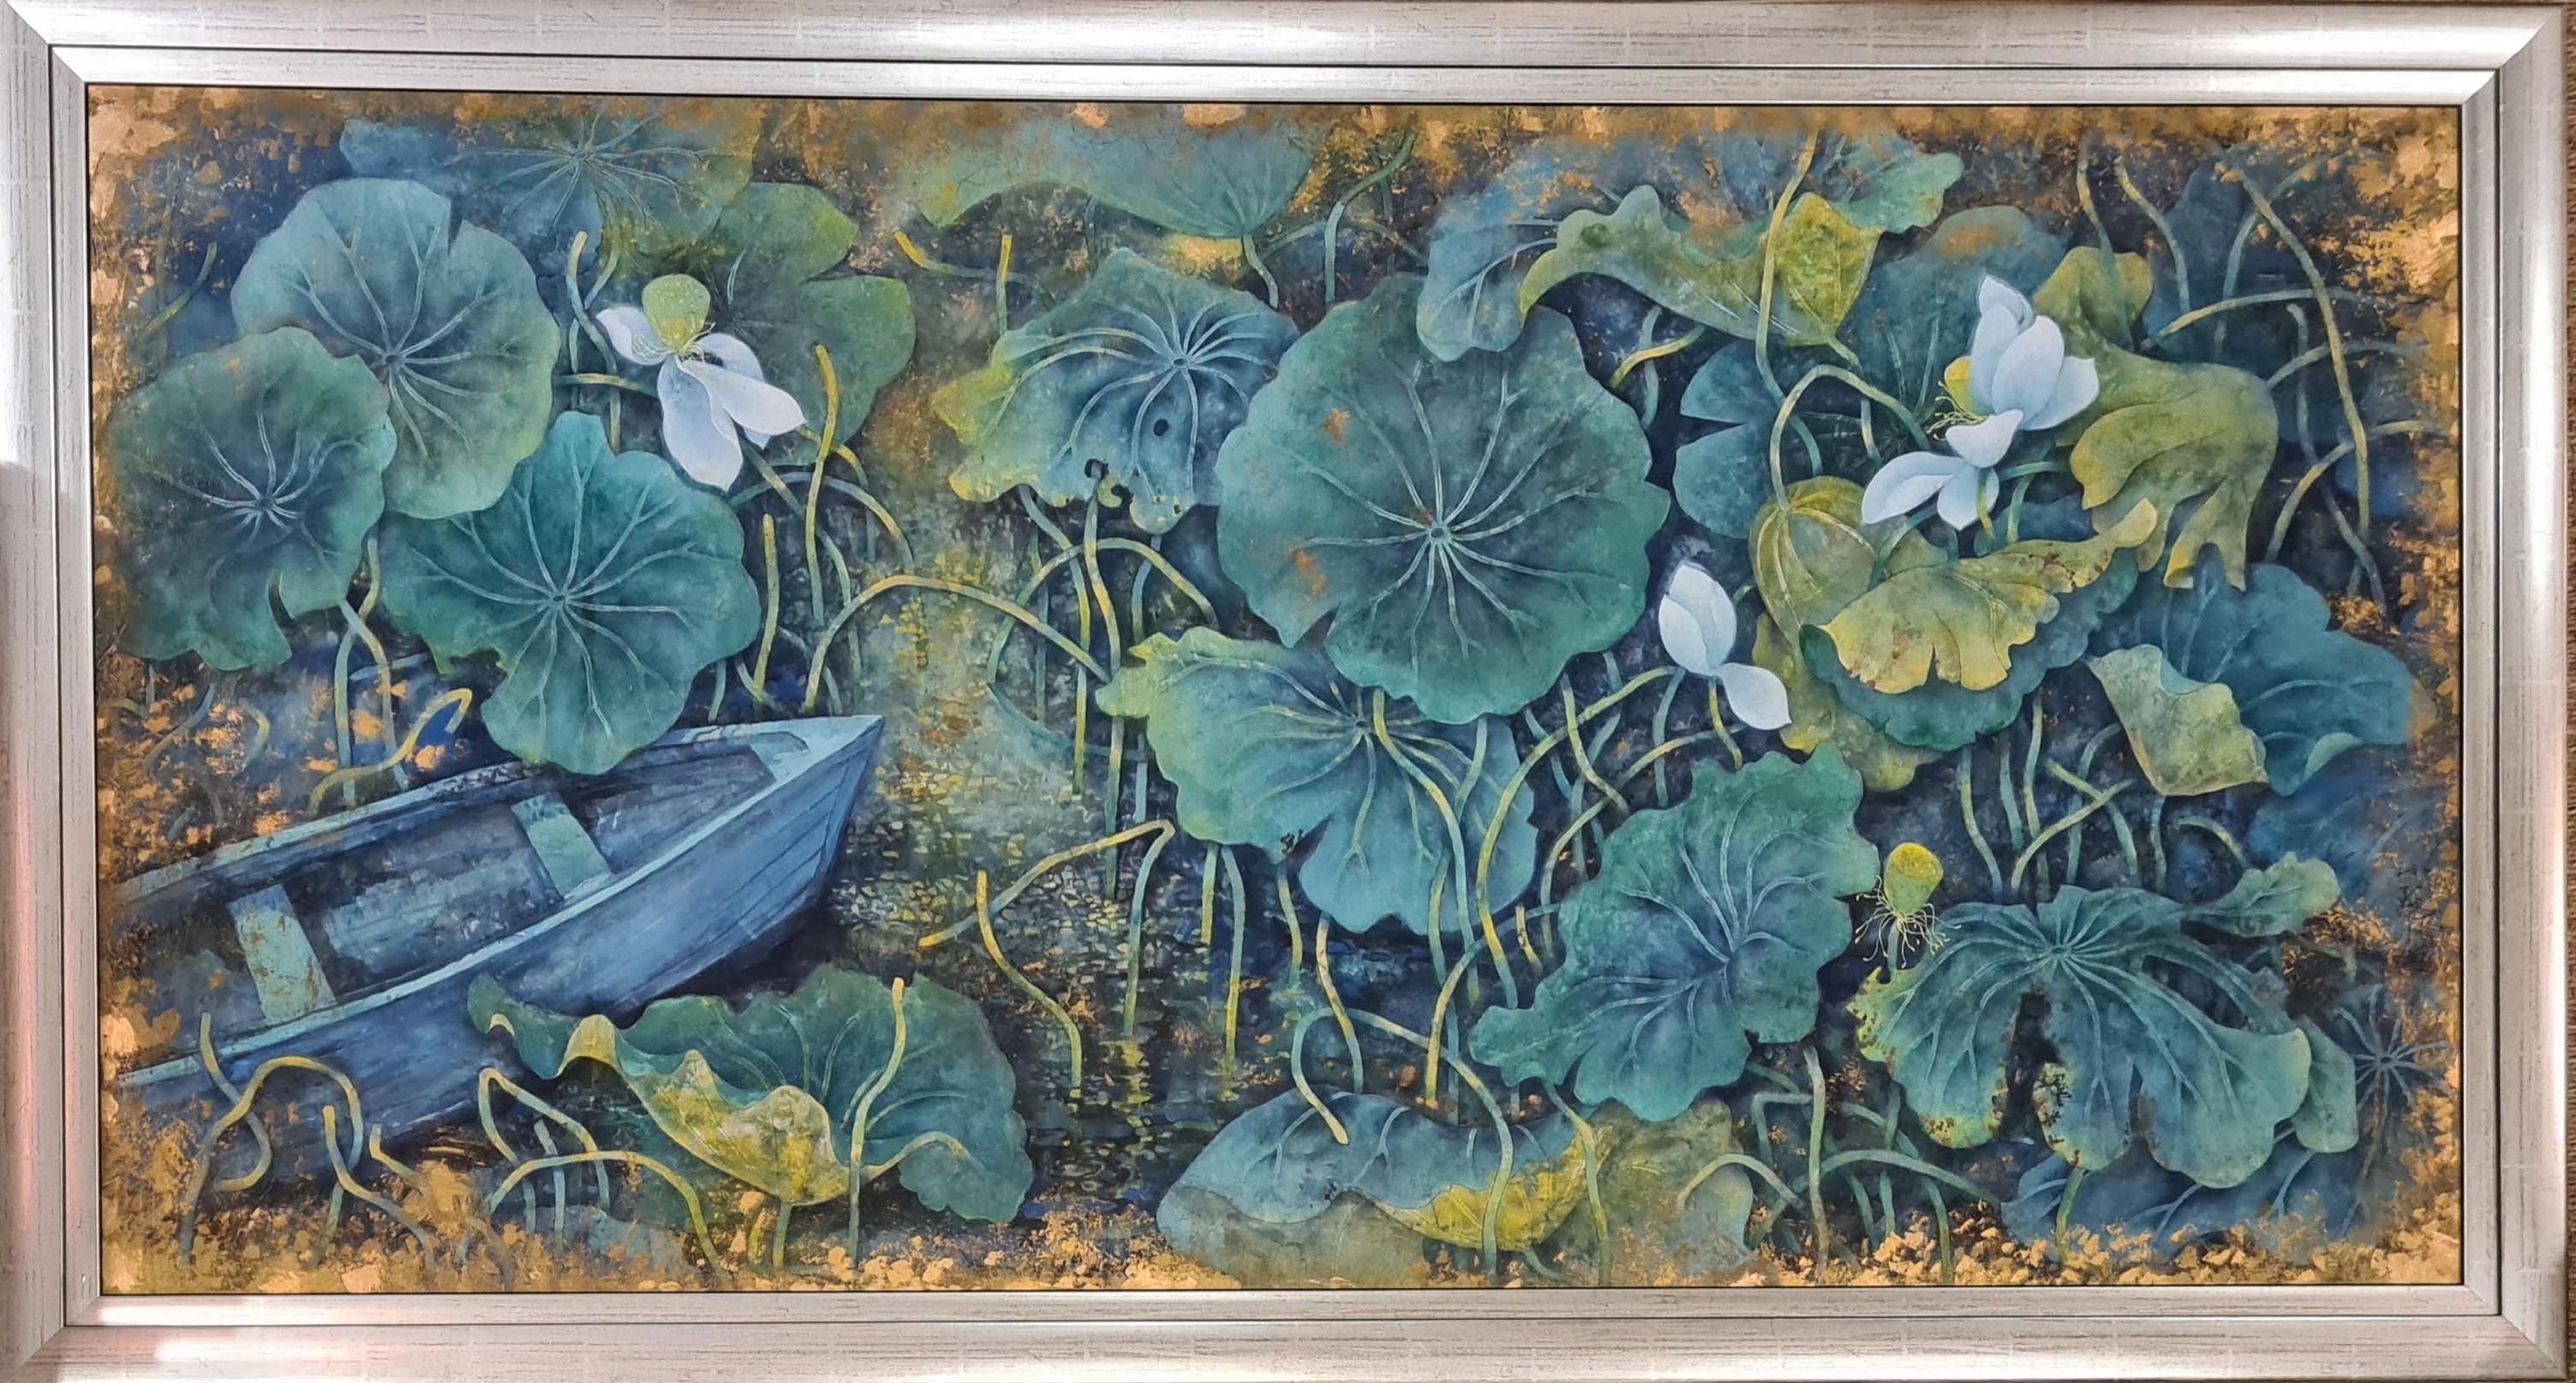 Water lillies, Hommage Zhou Dun-y,  Large Contemporary Chinese Painting on Paper